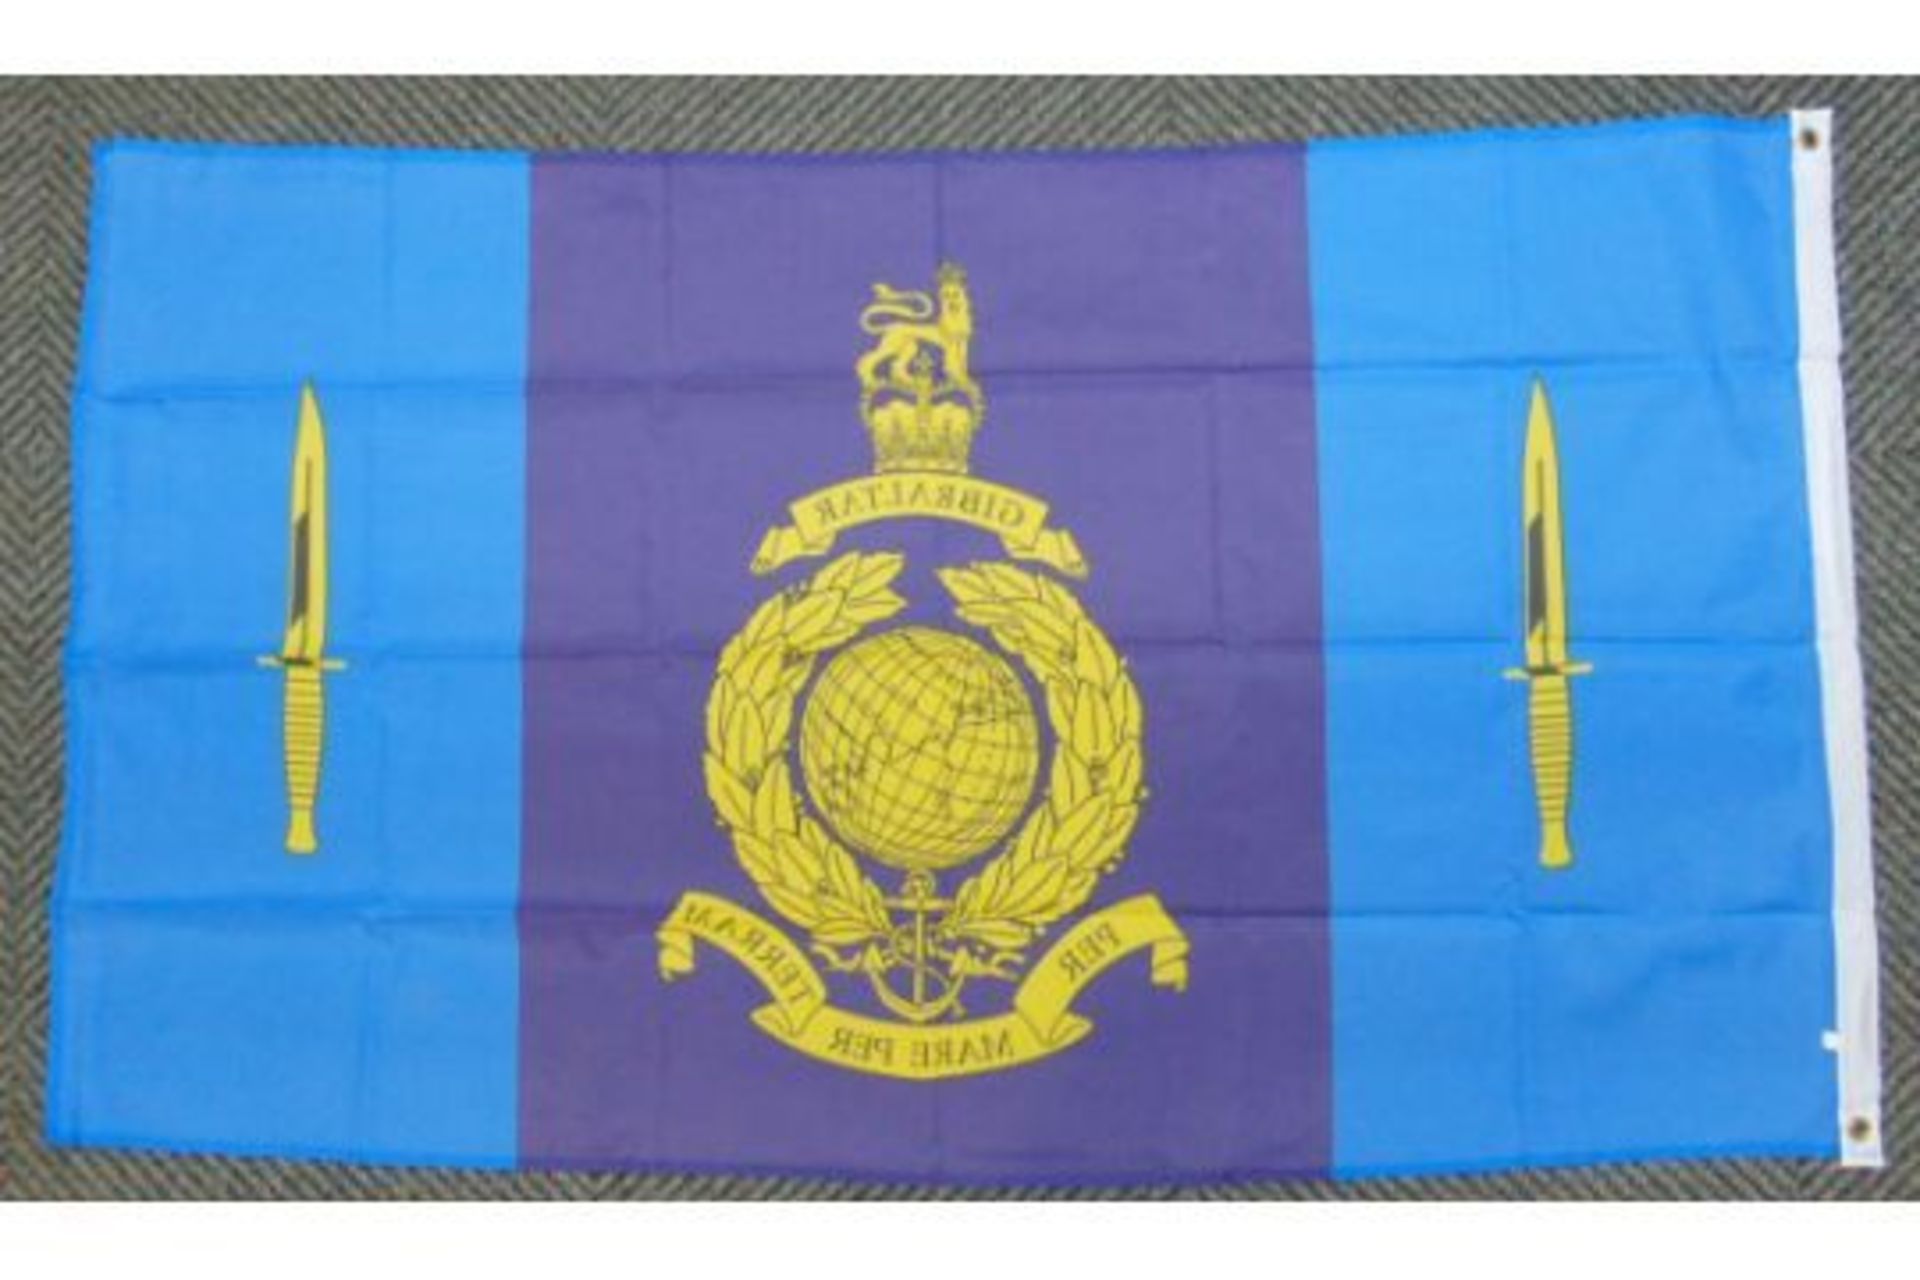 40 Commando Royal Marines Flag - 5ft x 3ft with Metal Eyelets. - Image 2 of 4